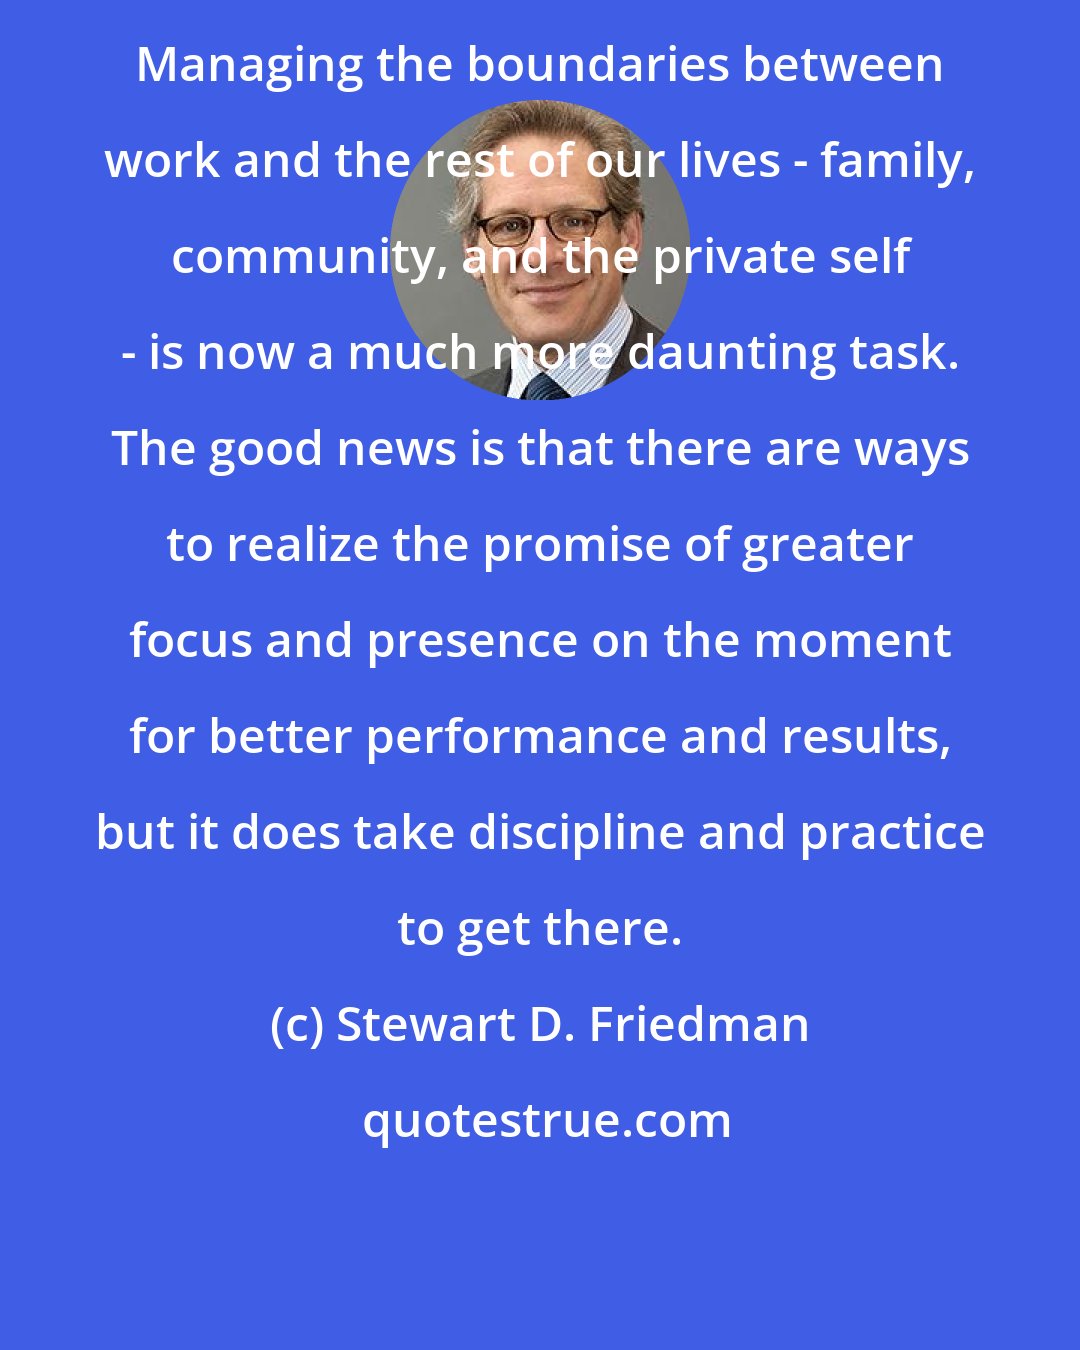 Stewart D. Friedman: Managing the boundaries between work and the rest of our lives - family, community, and the private self - is now a much more daunting task. The good news is that there are ways to realize the promise of greater focus and presence on the moment for better performance and results, but it does take discipline and practice to get there.